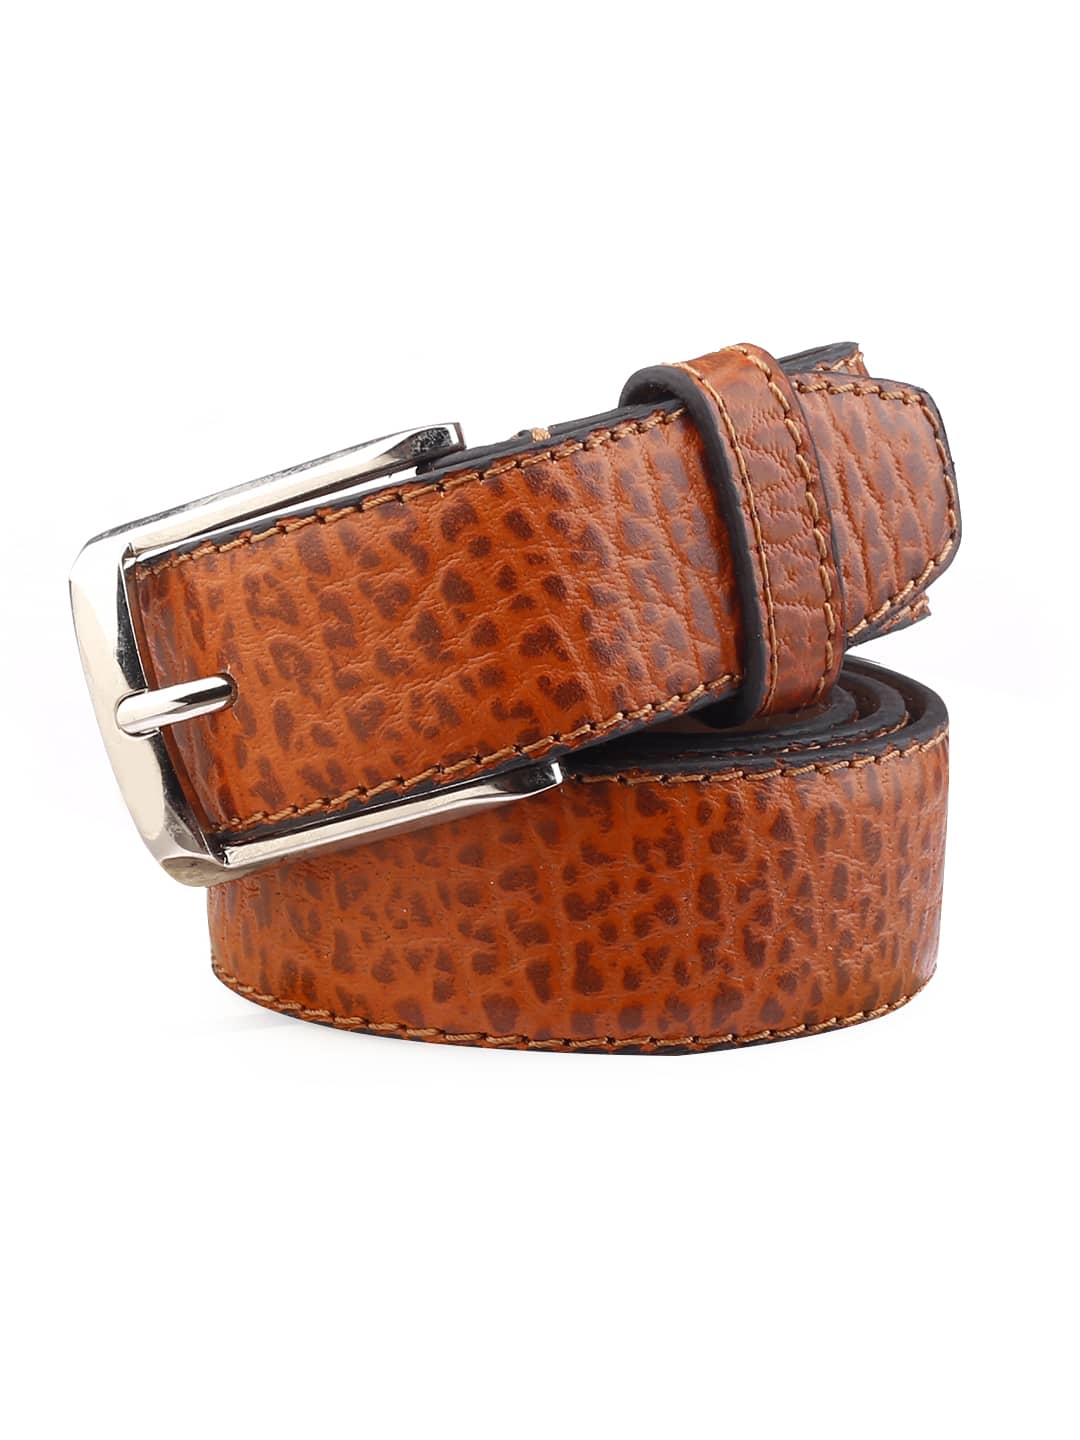 Bacca Bucci 'Sartorial Elegante' Men's Genuine Leather Belt - 35mm Imported Pin Buckle in Signature Wooden Gift Box